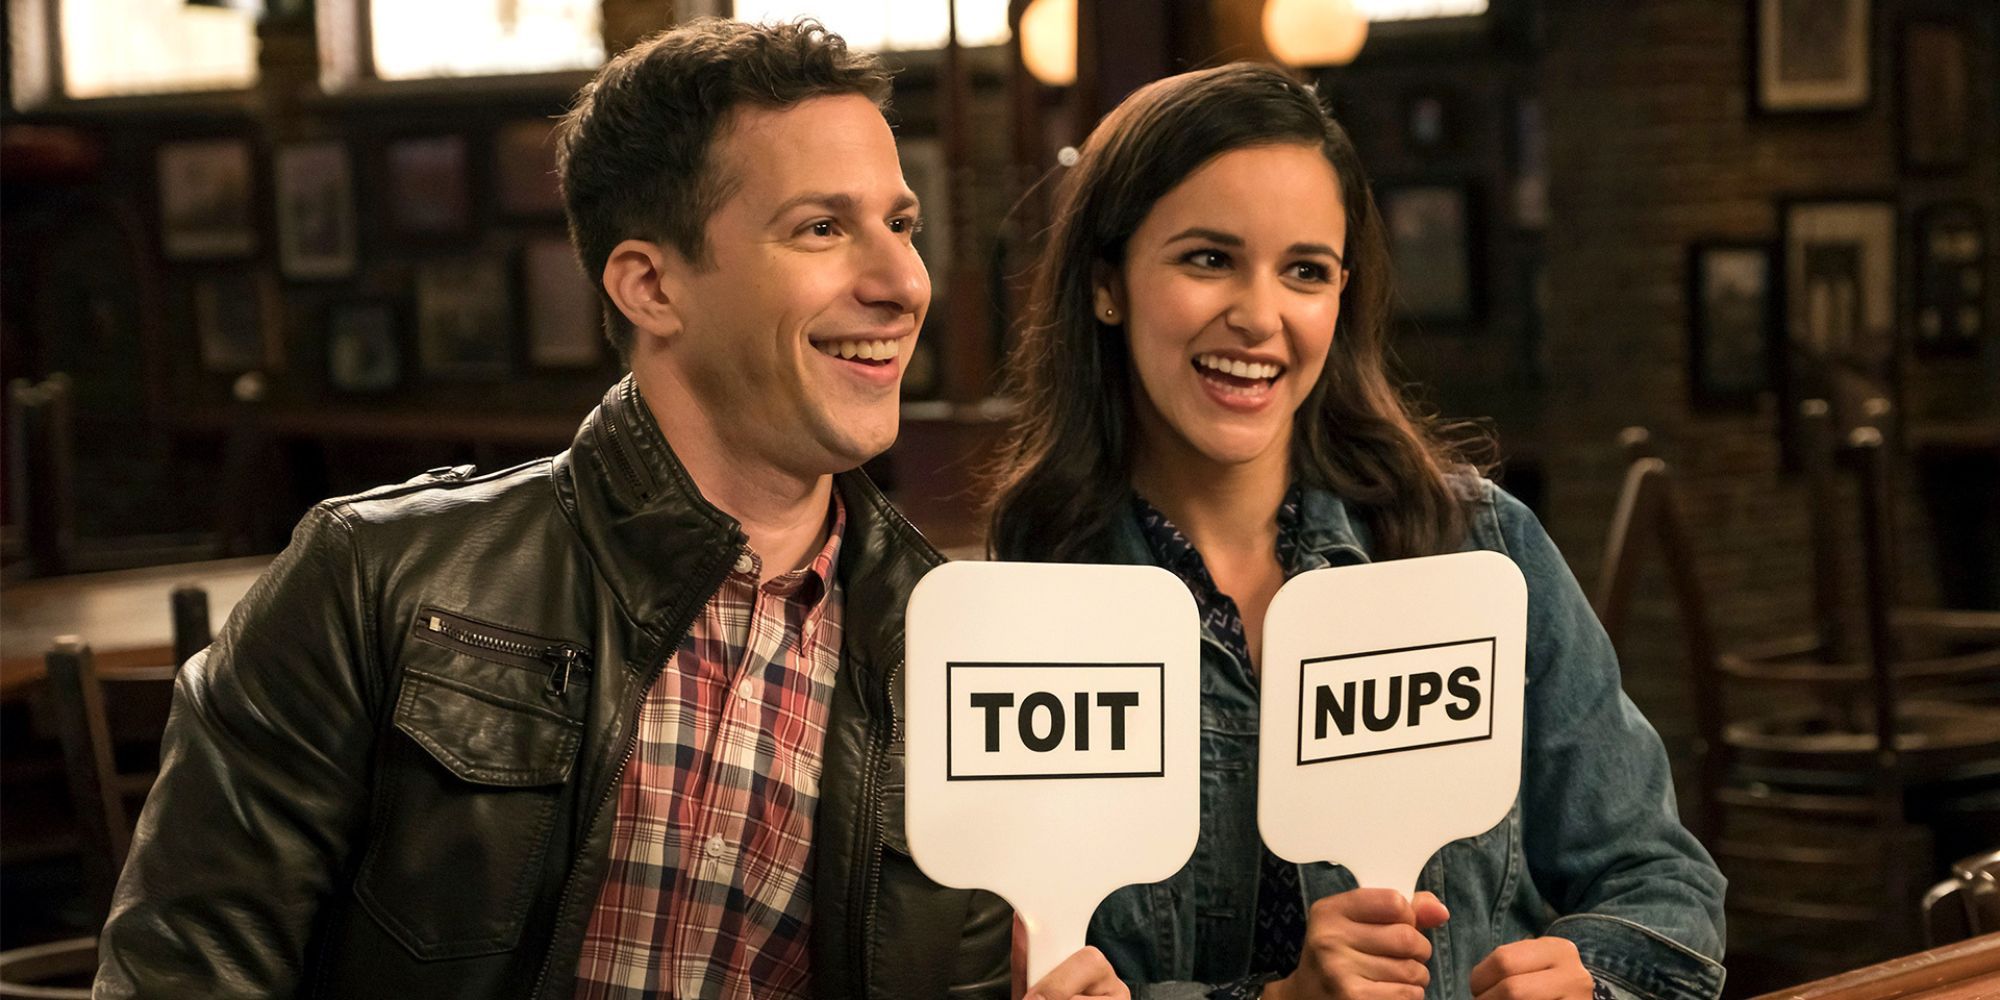 Jake and Amy smiling while holding signs in Brooklyn Nine-Nine.